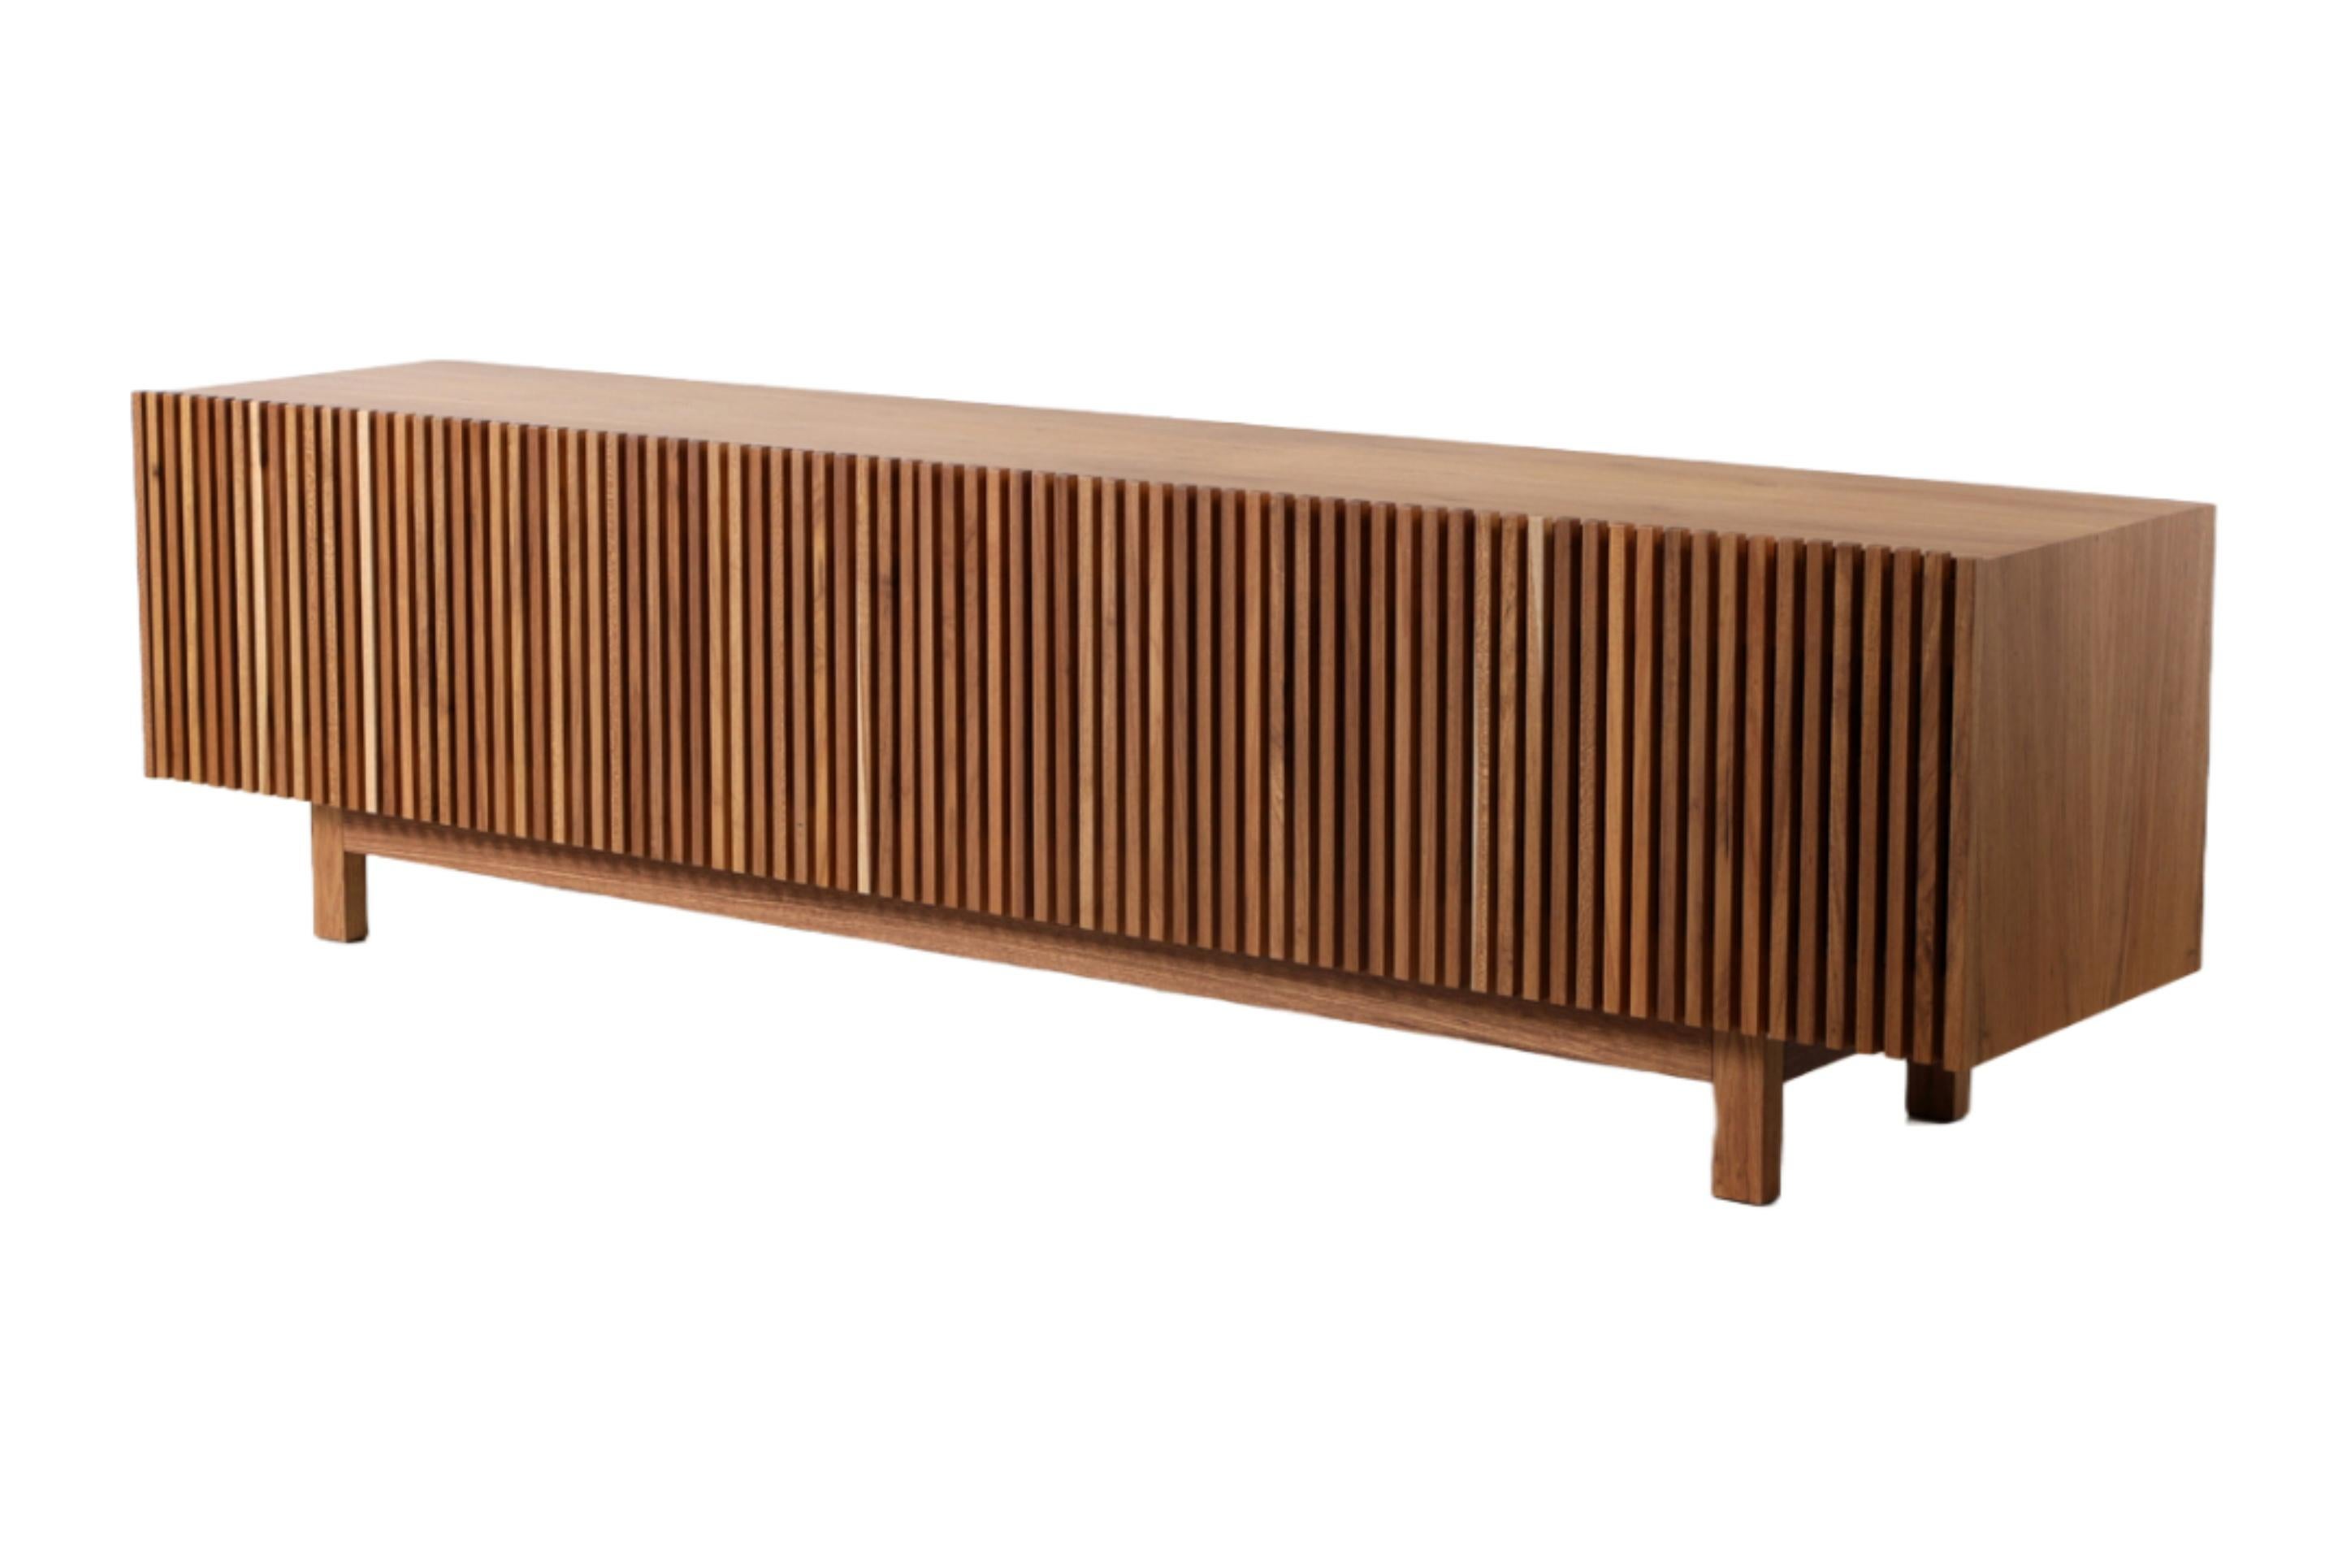 Inspired by the sun blocks or brises soleil featured on Modernist architecture which has captivated Alessandra Delgado since the early days of her career as a designer, Athena credenza design incorporates wood slat doors made using the finest